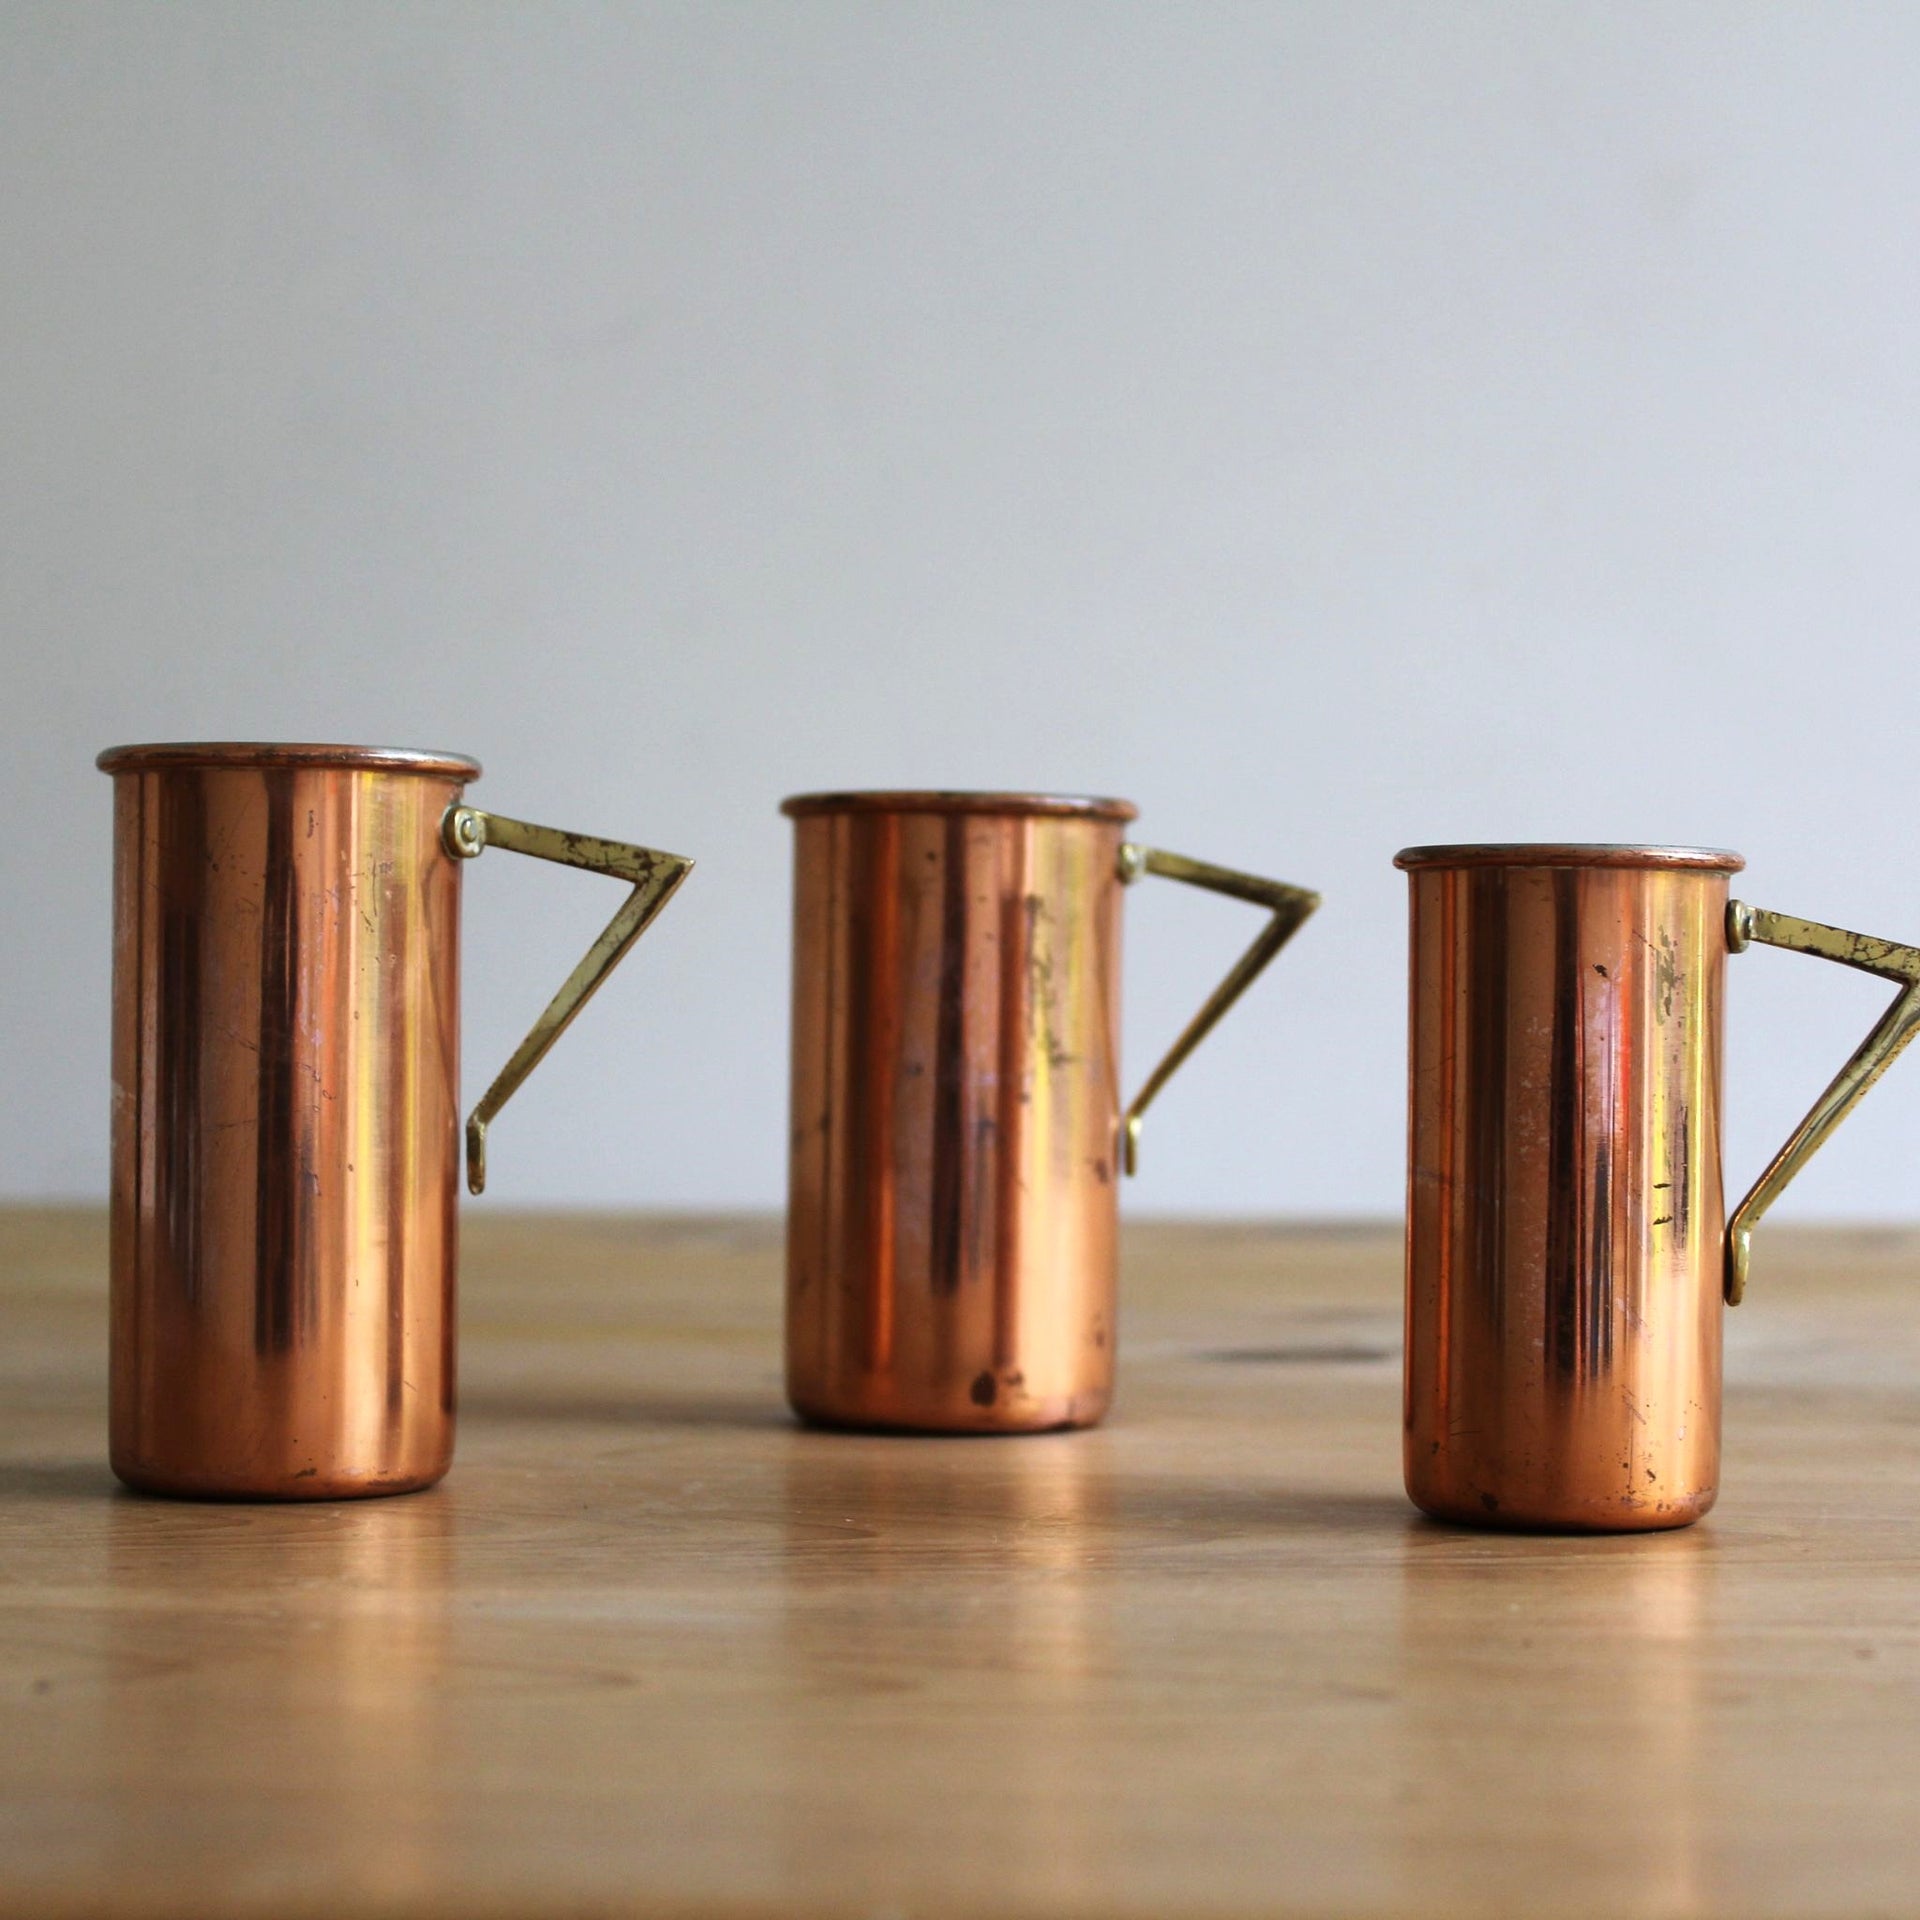 4 Vtg Copper Brass Handle Tall Stacking Measuring Liquid Cups